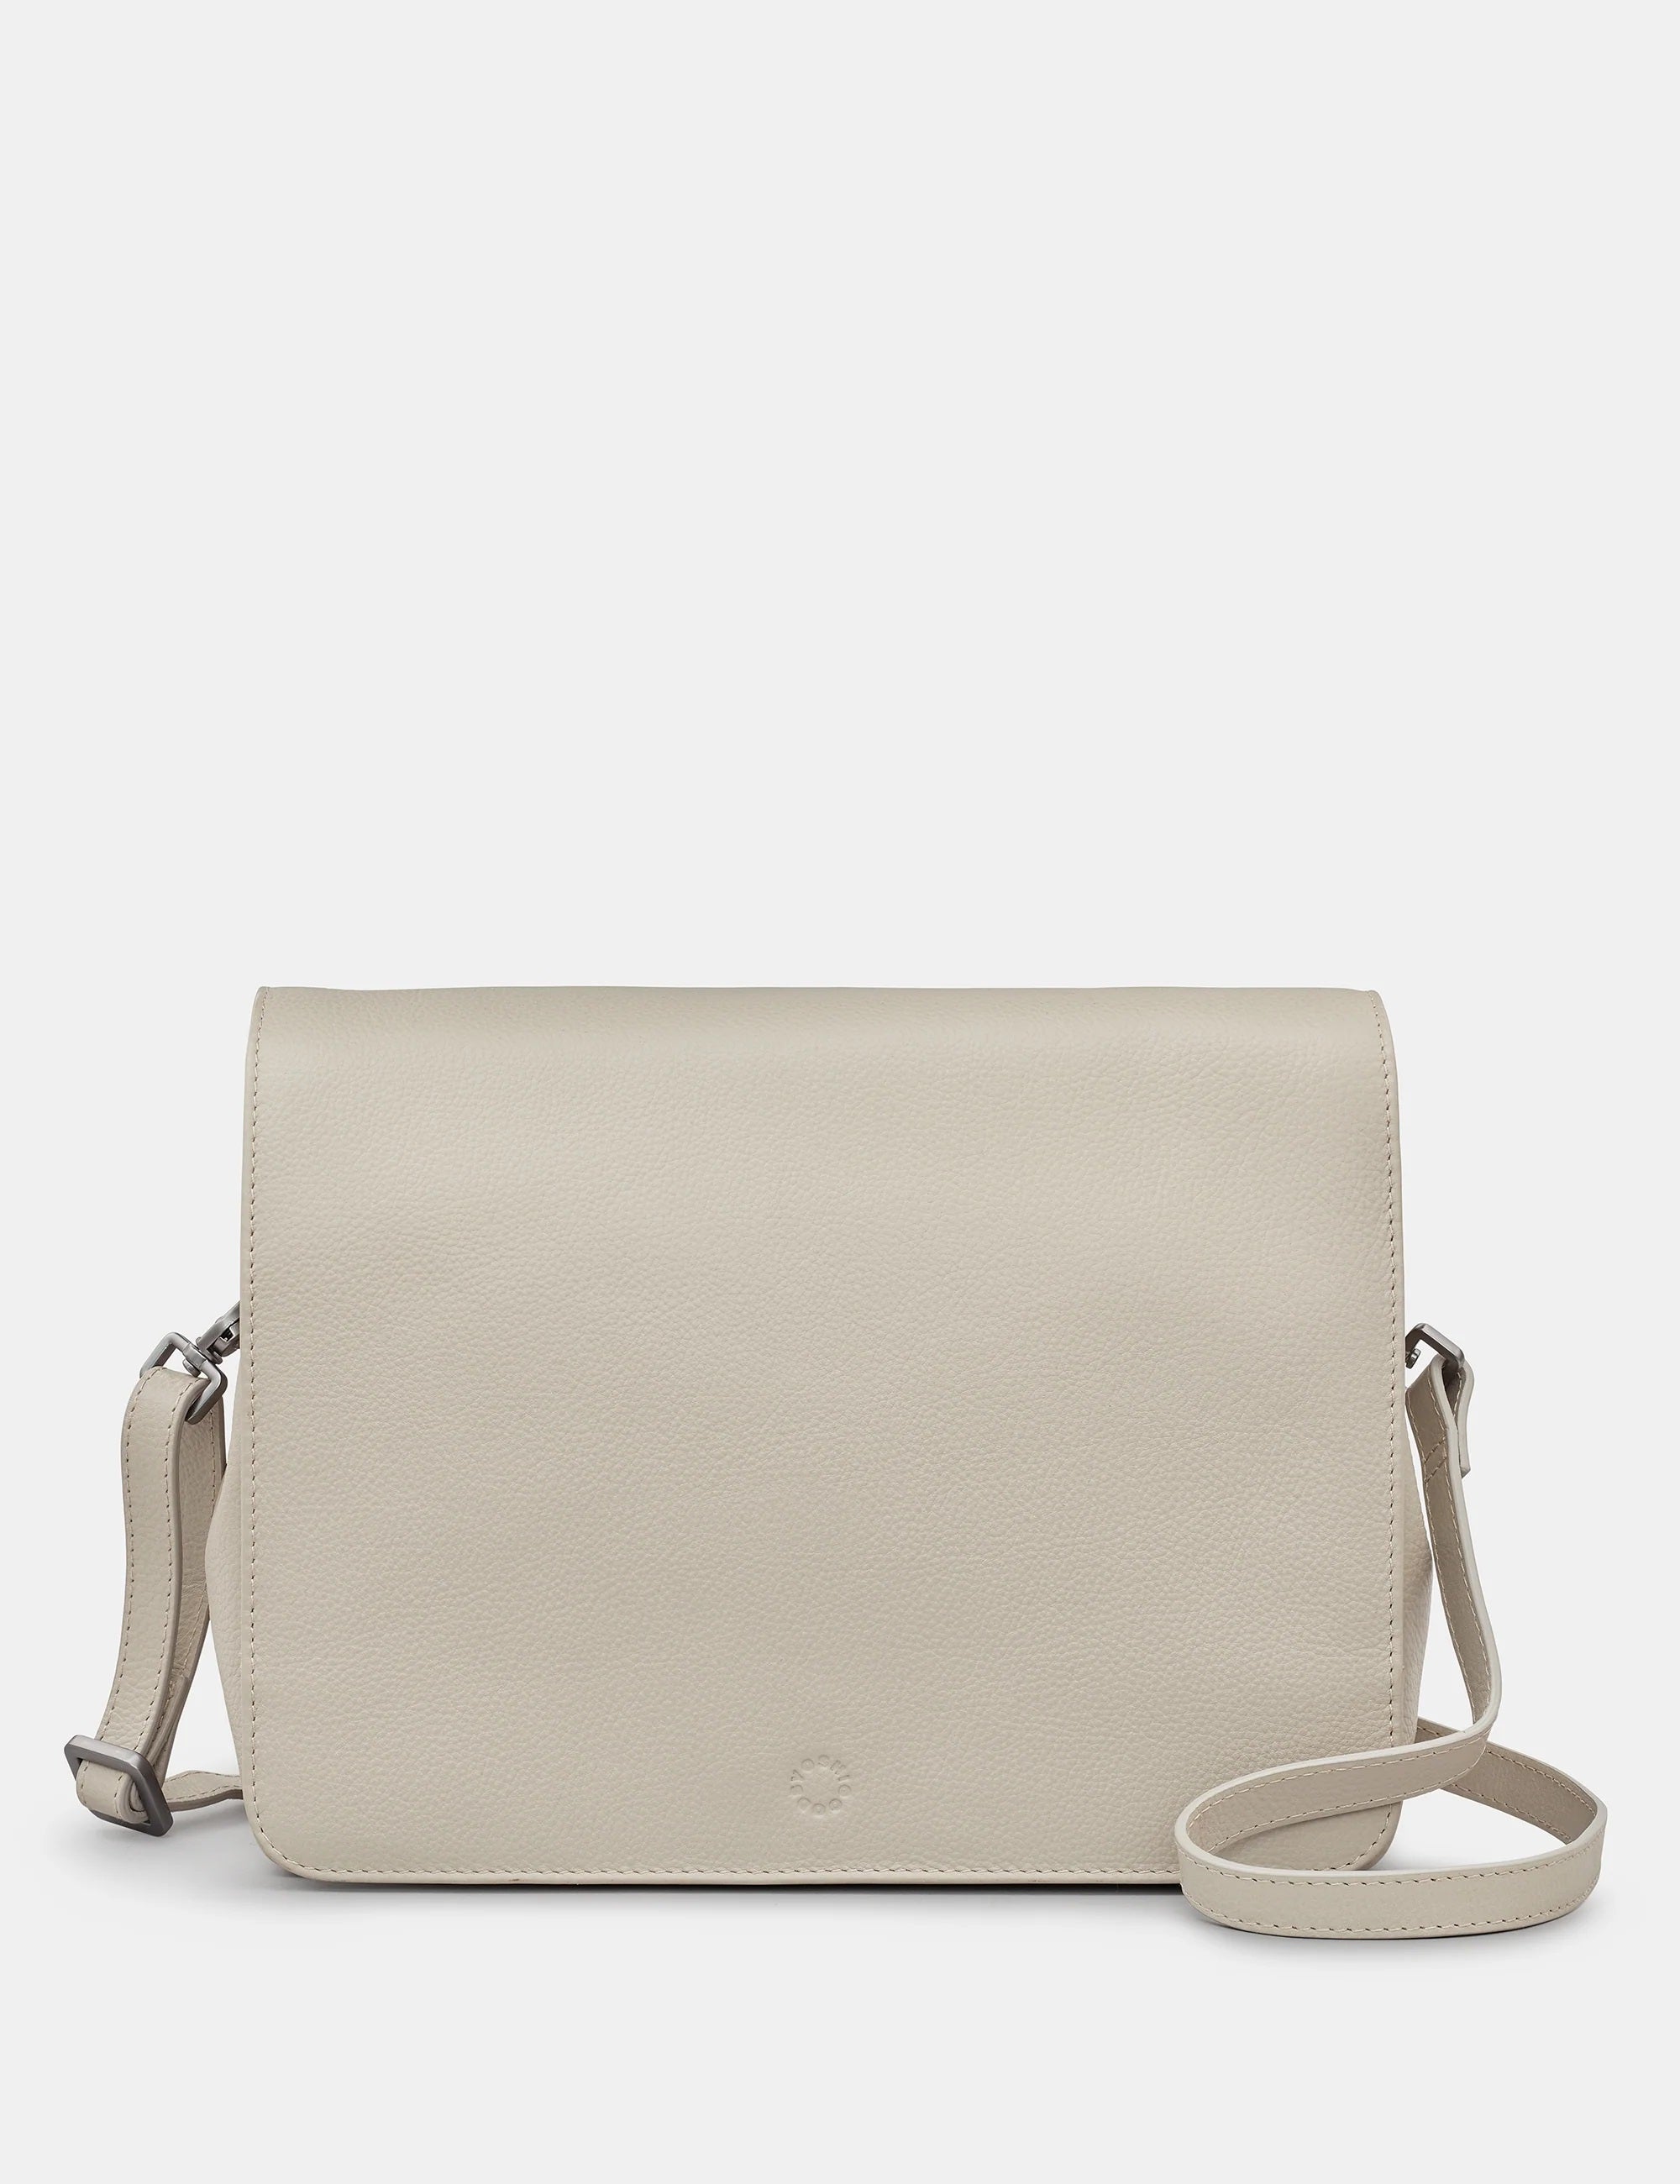 Bexley Leather Flap Over Bag - Soft Grey